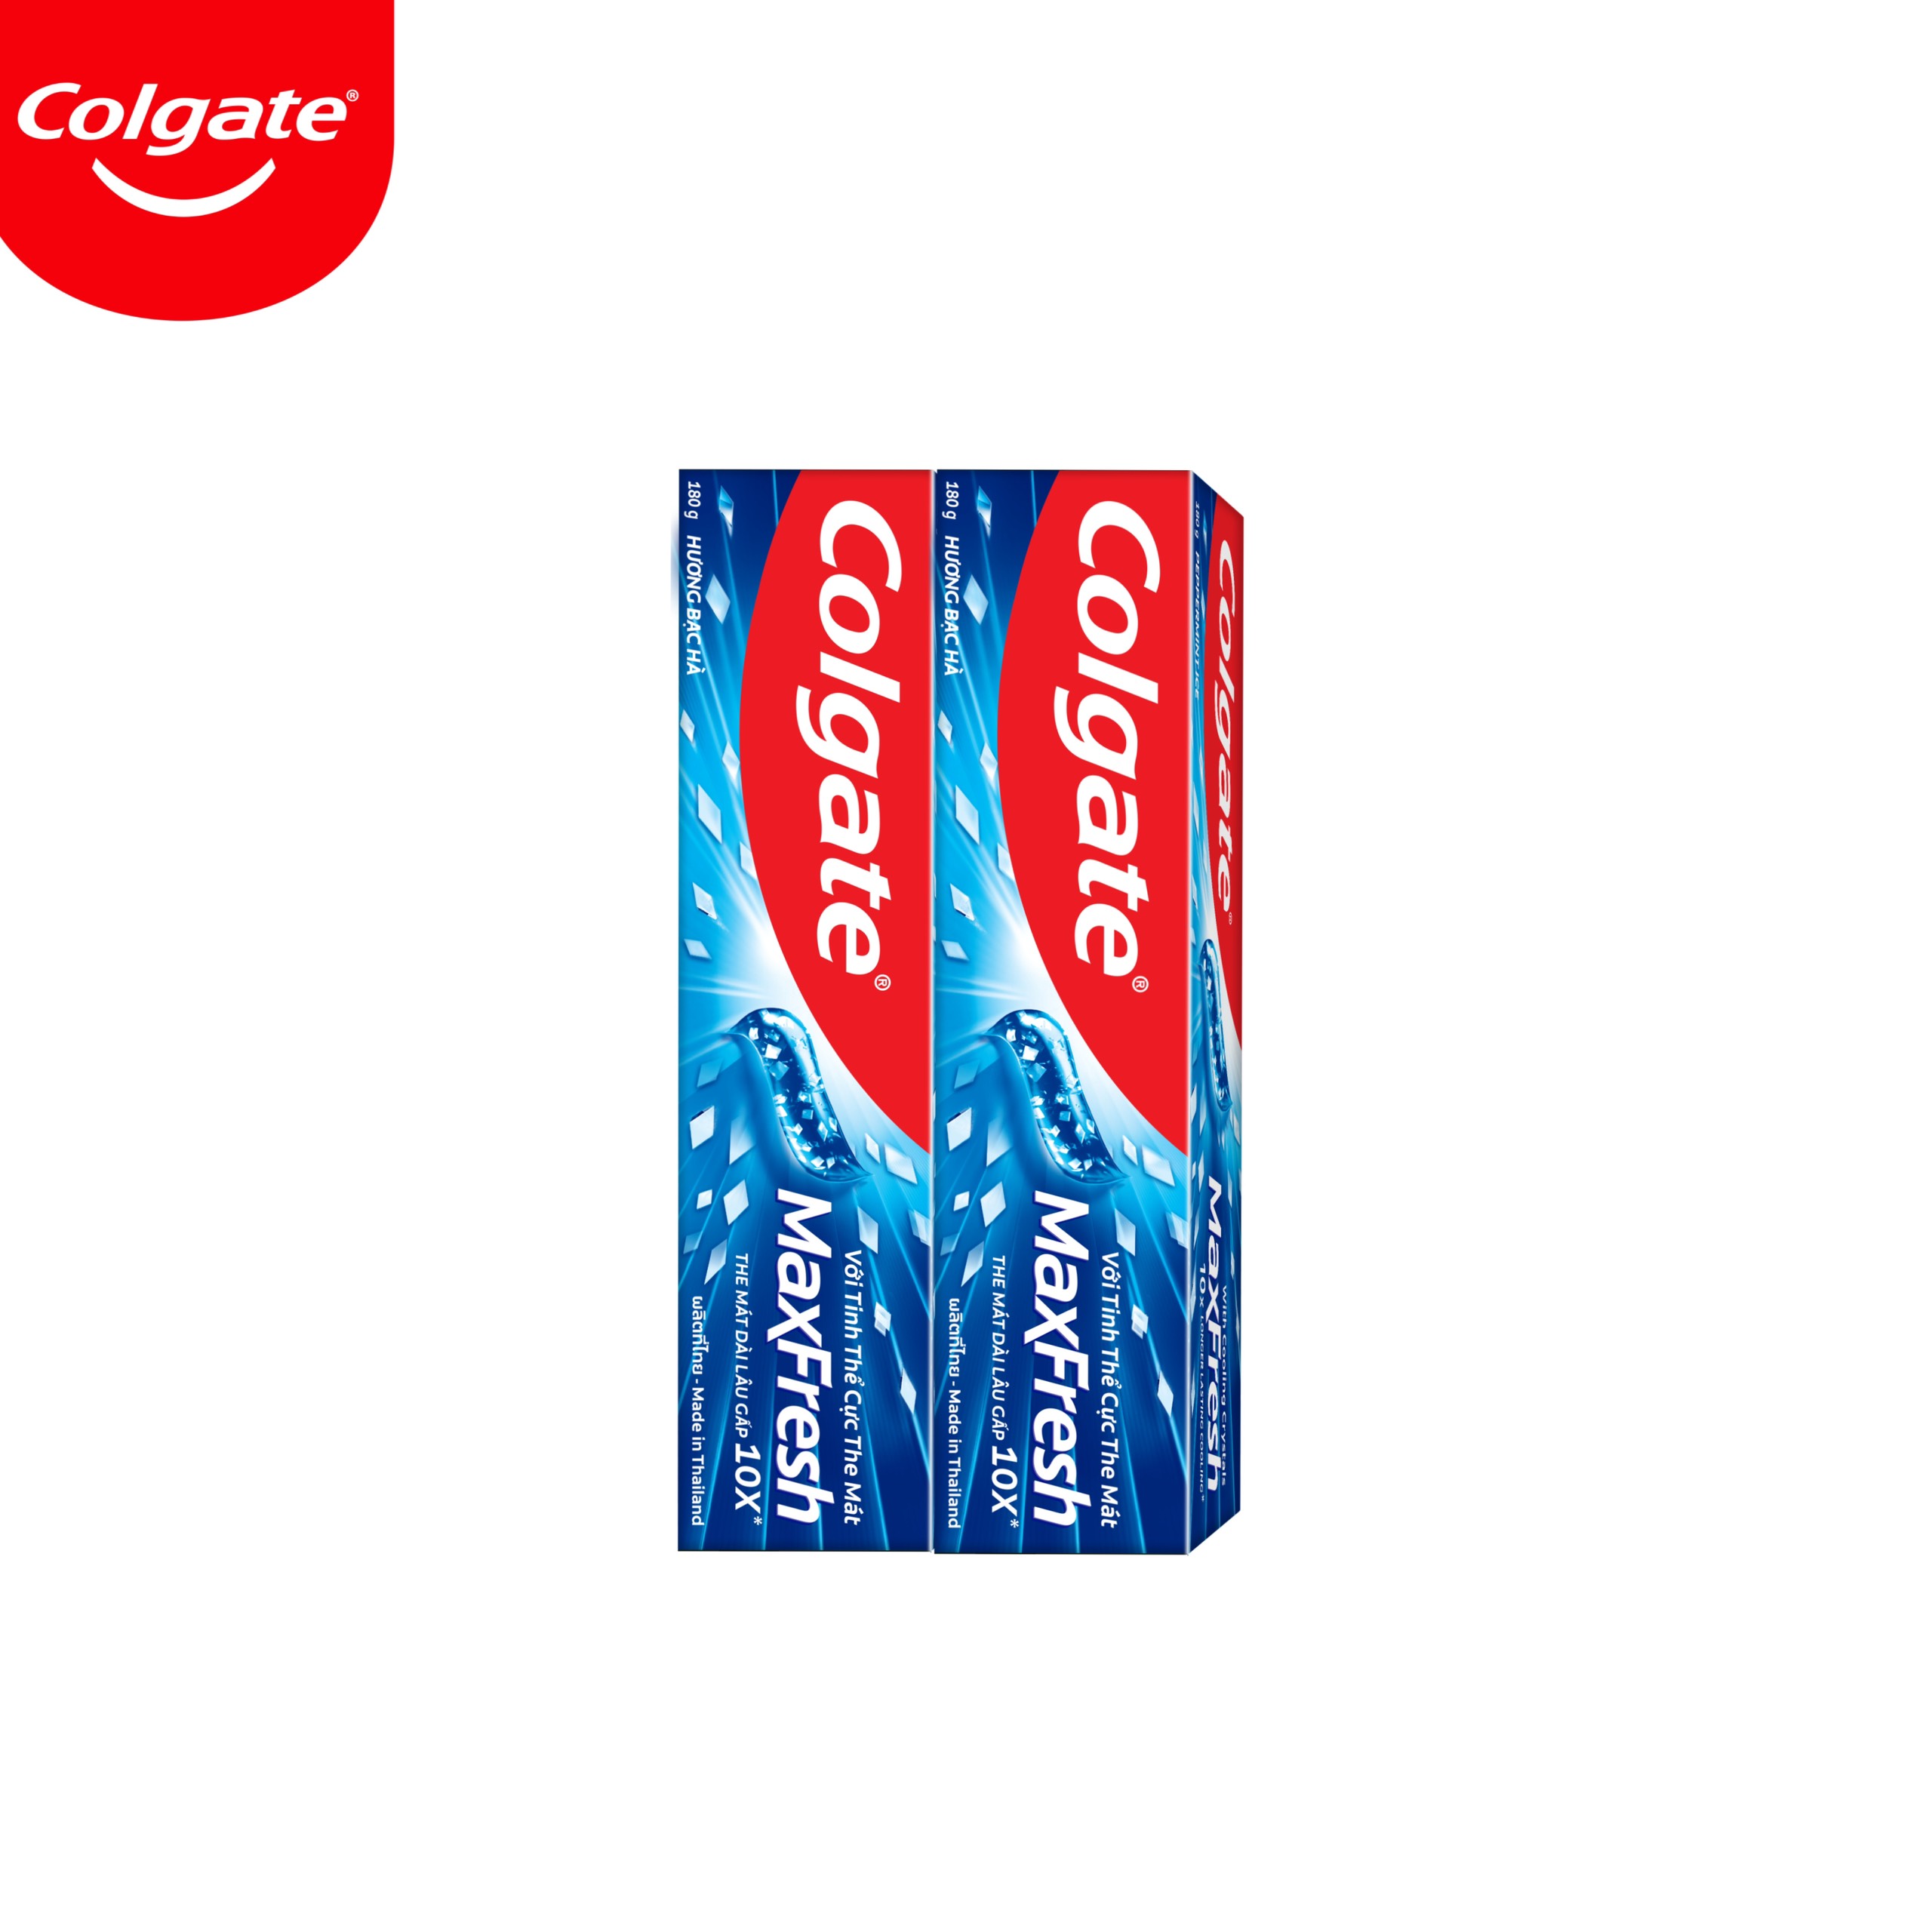 Colgate Peppermint Toothpaste Maxfresh 180g tube